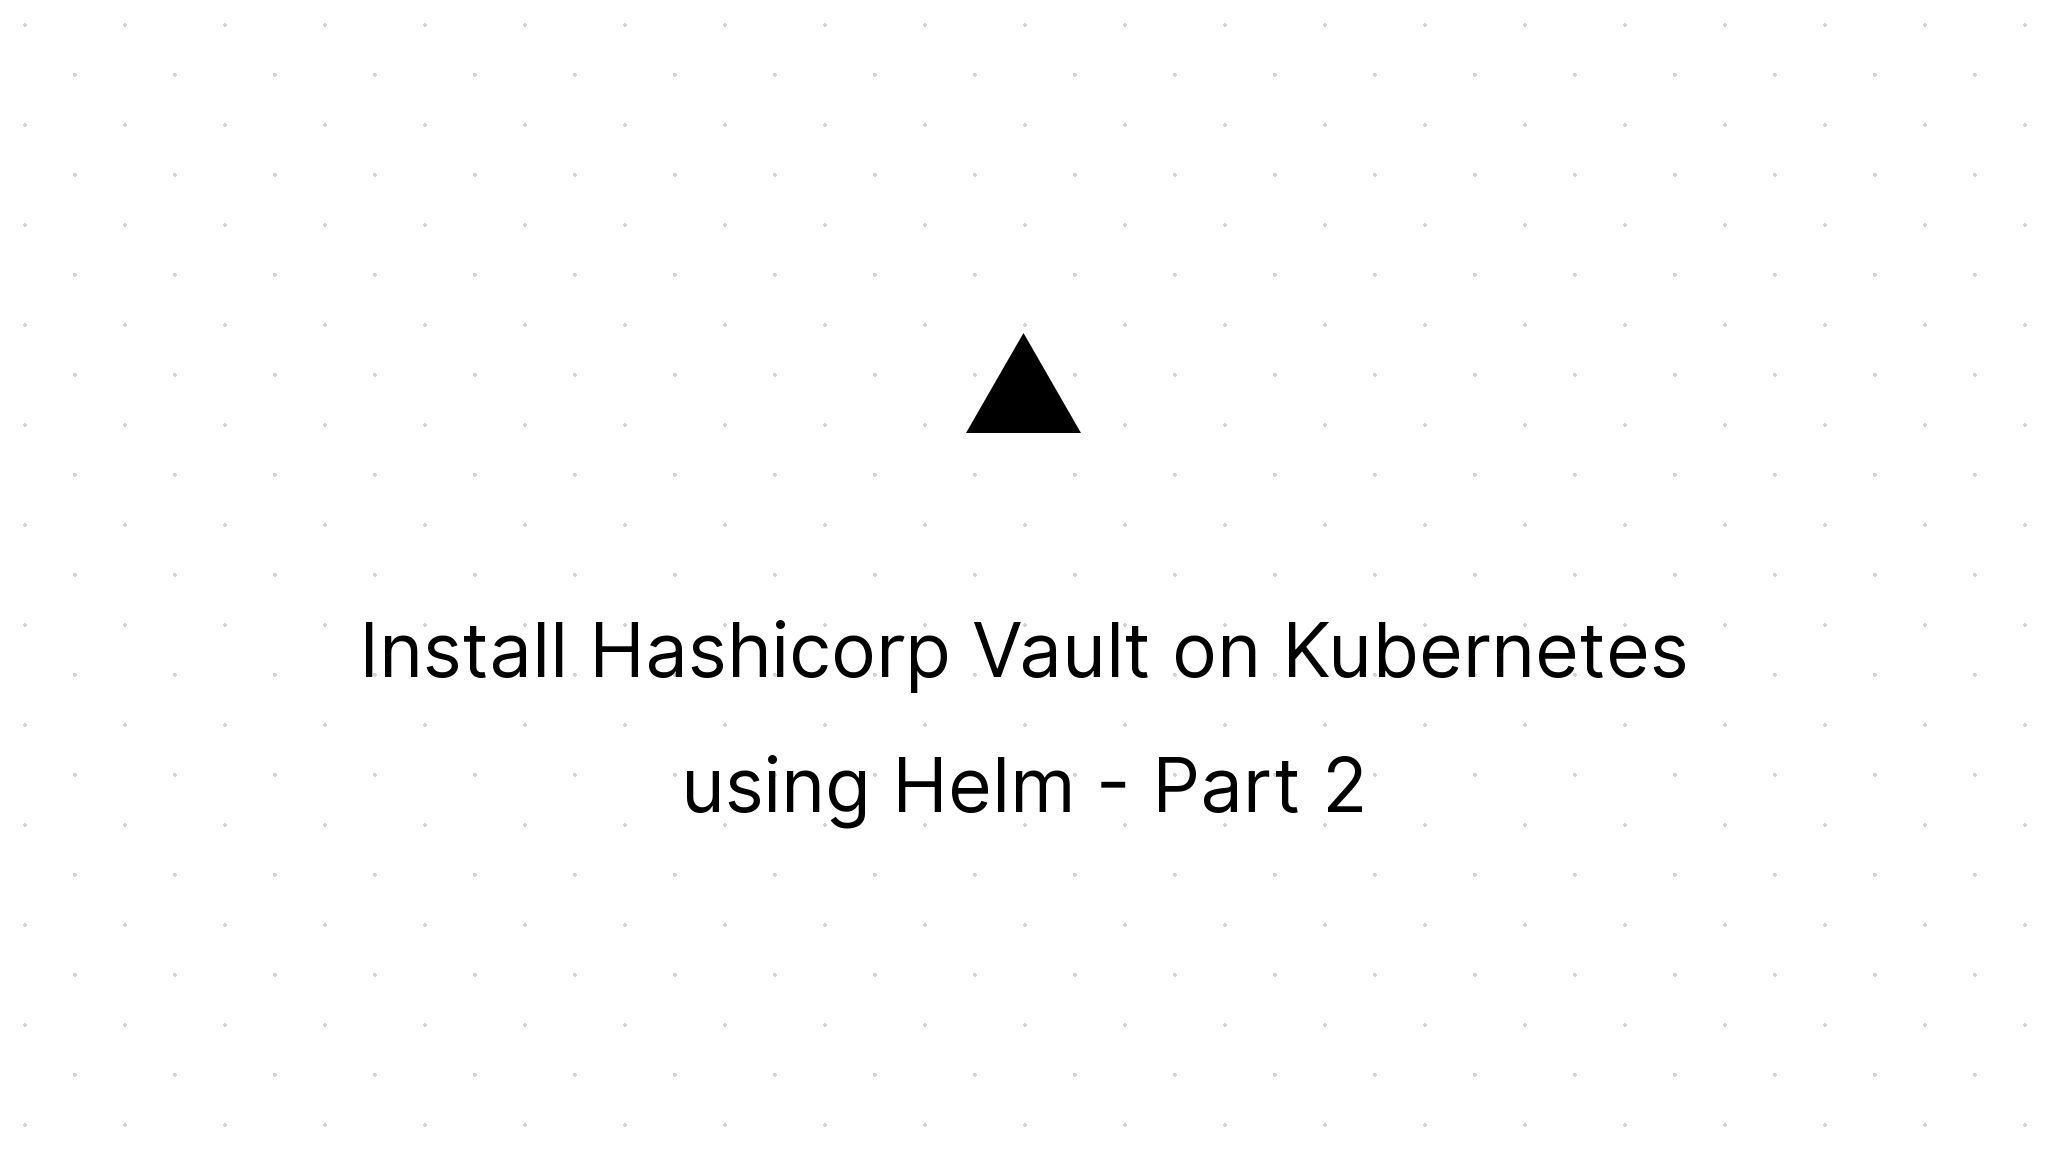 Cover Image for Install Hashicorp Vault on Kubernetes using Helm - Part 2